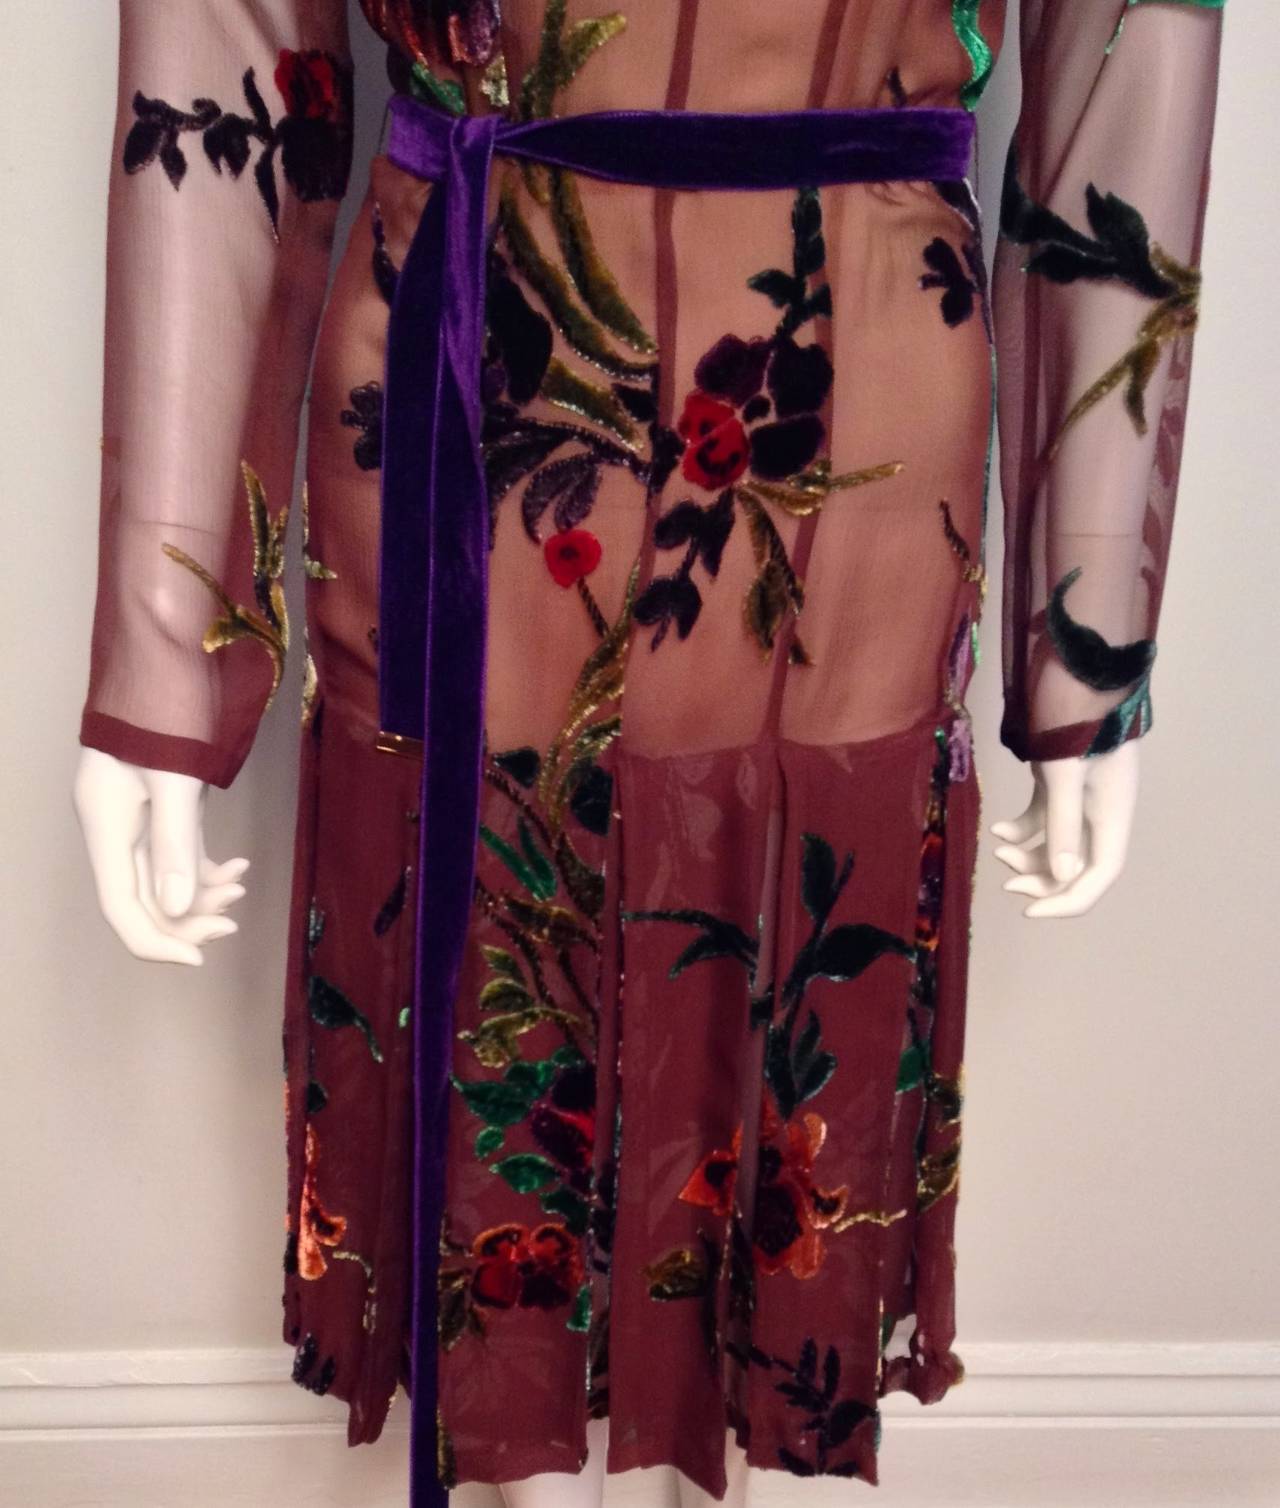 Beautiful long-sleeved silk brown dress with floral velvet and a pleated skirt. Still with tags, this dress retailed for $12,250 originally. 

As seen on Anna Wintour in 2012 when she hosted a fundraiser for Obama in London. 
Rare and very